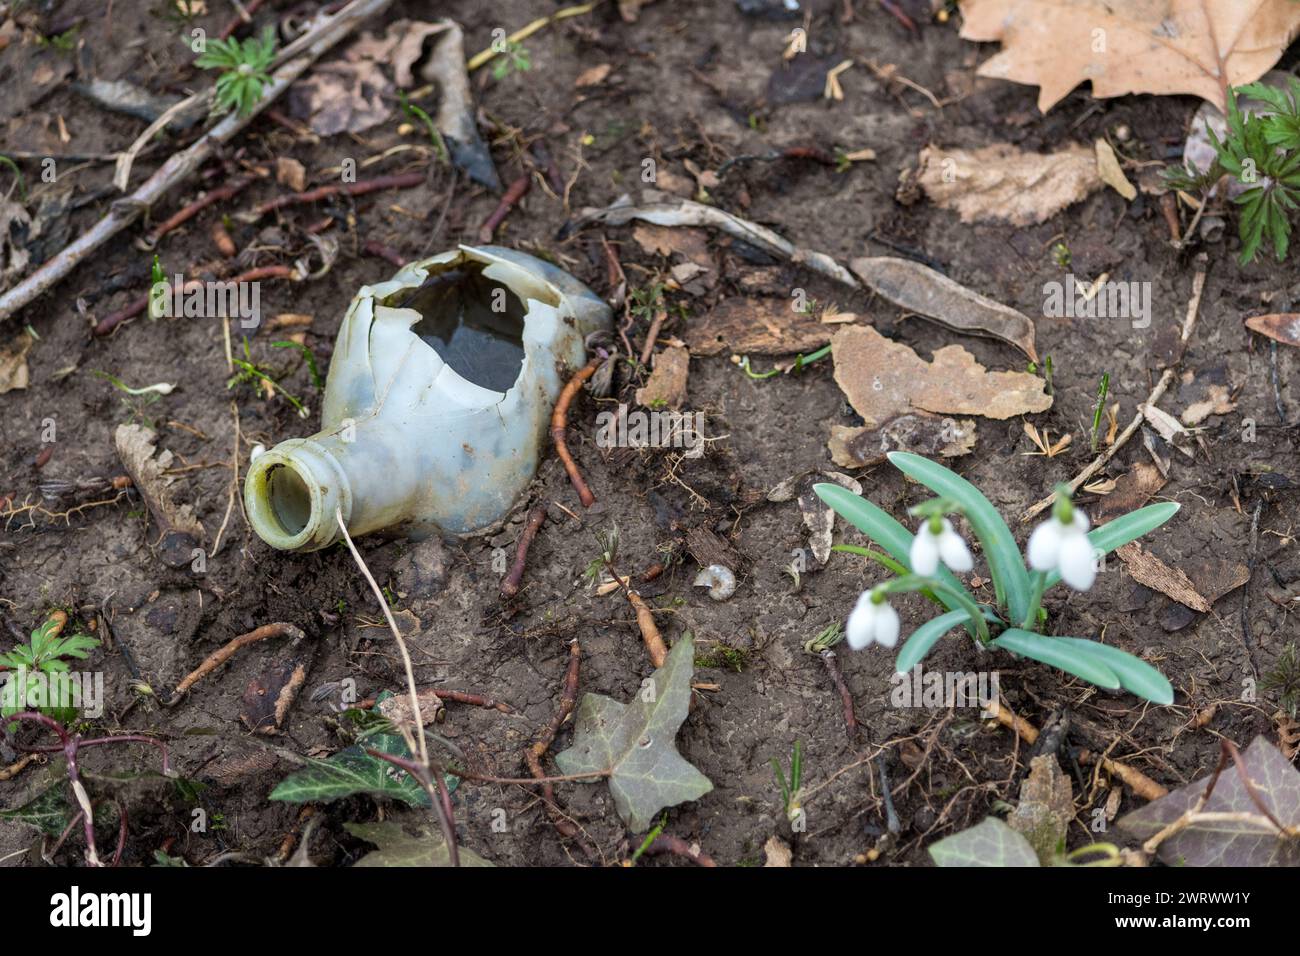 Top view of a portion of a plastic bottle hidden underground and abandoned in a forest. Polluting waste that is ruining our planet. Plastic materials. Stock Photo